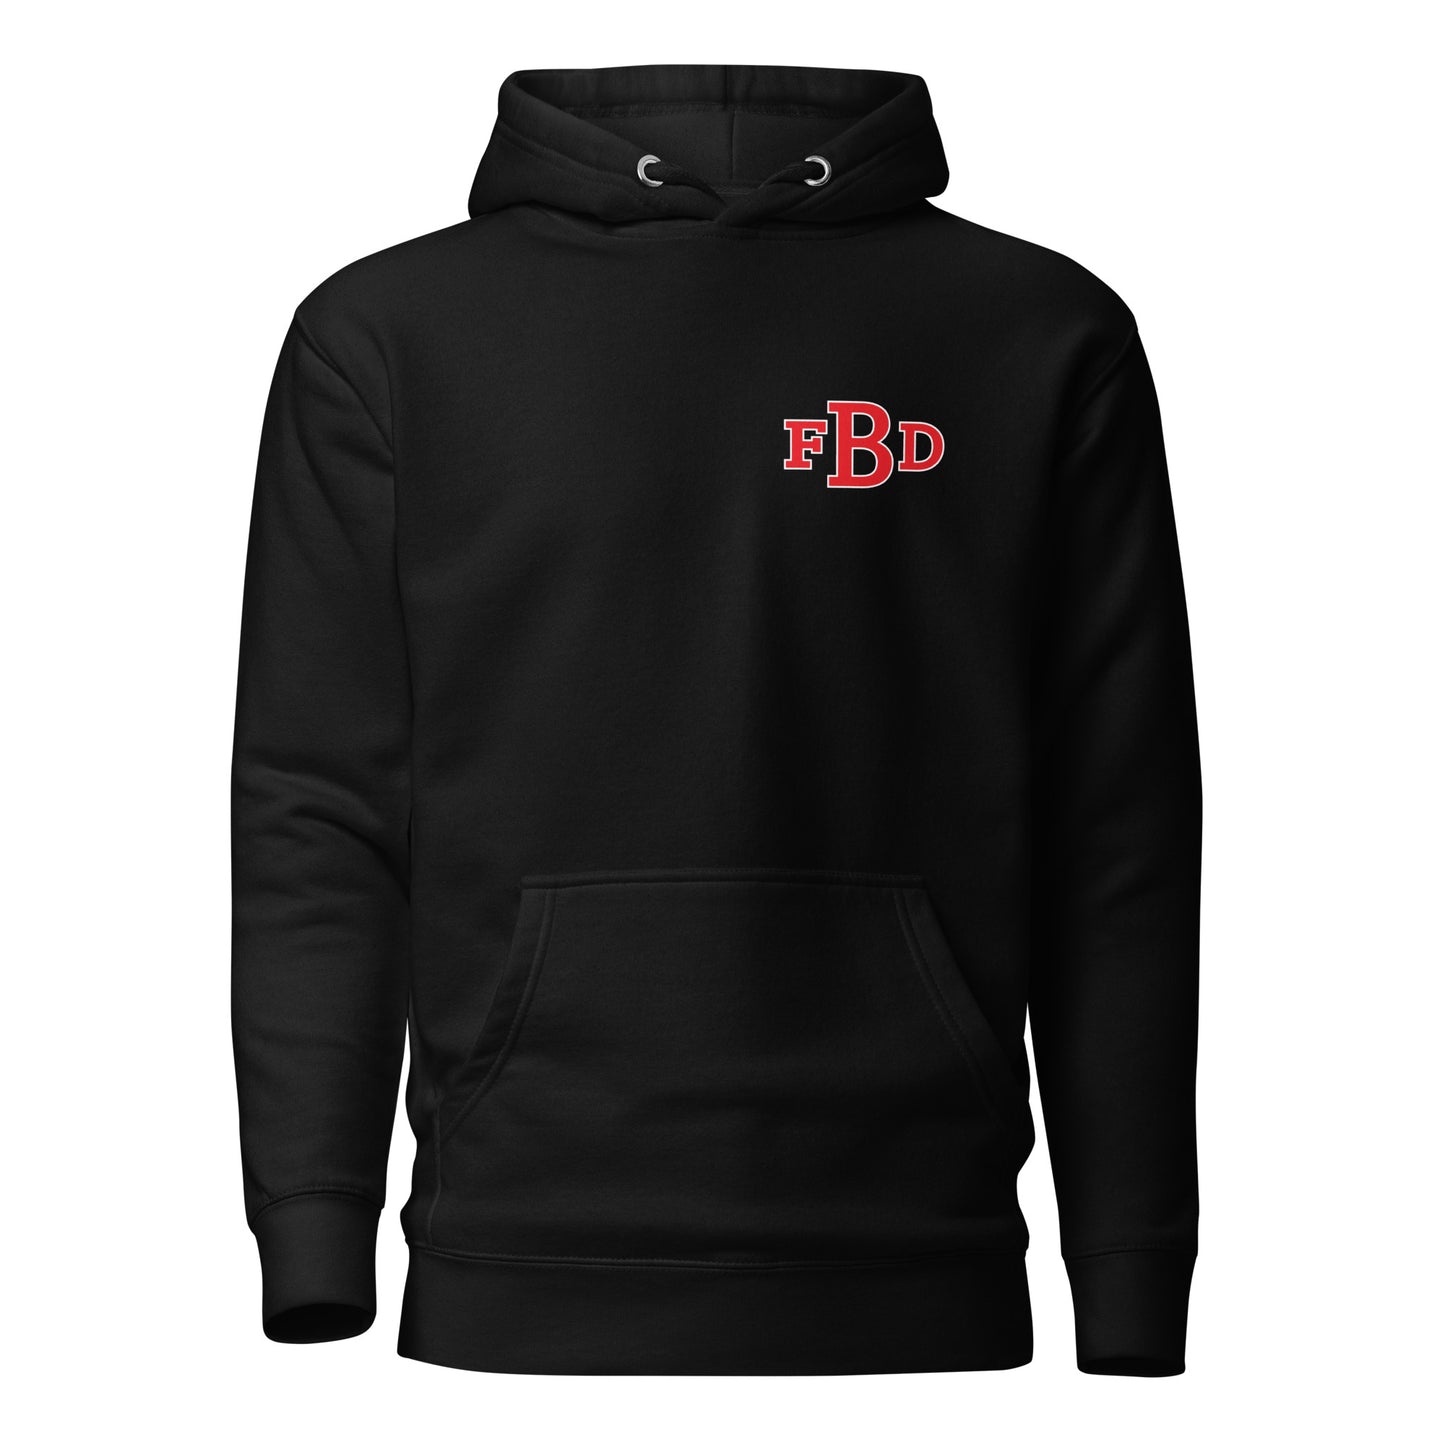 Unisex Hoodie (Contact us for Customization of Name and Badge Number)